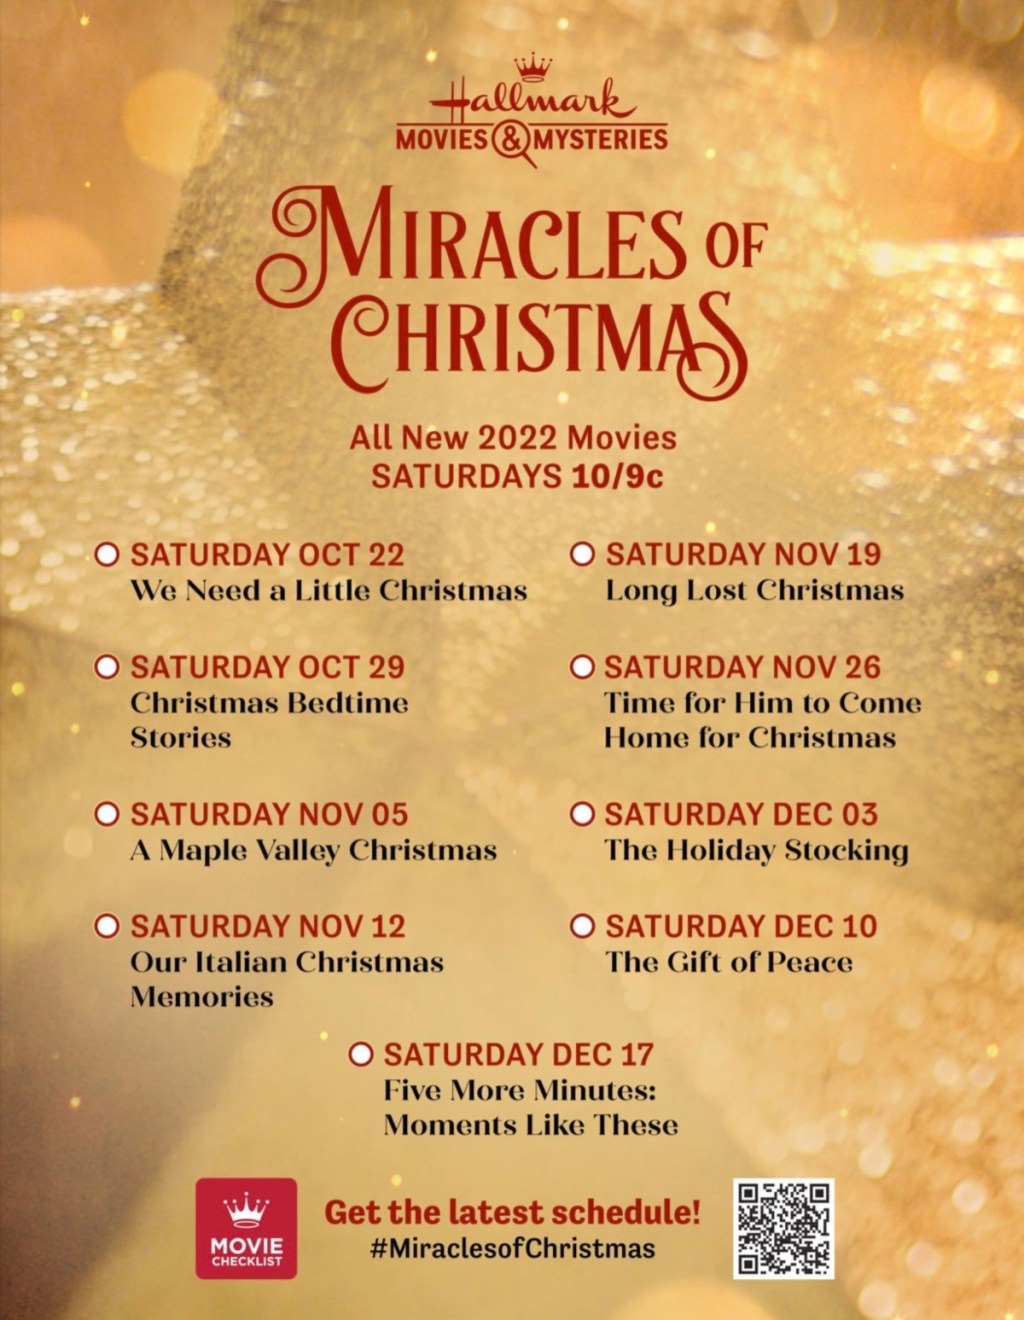 Hallmark Miracles of Christmas guide